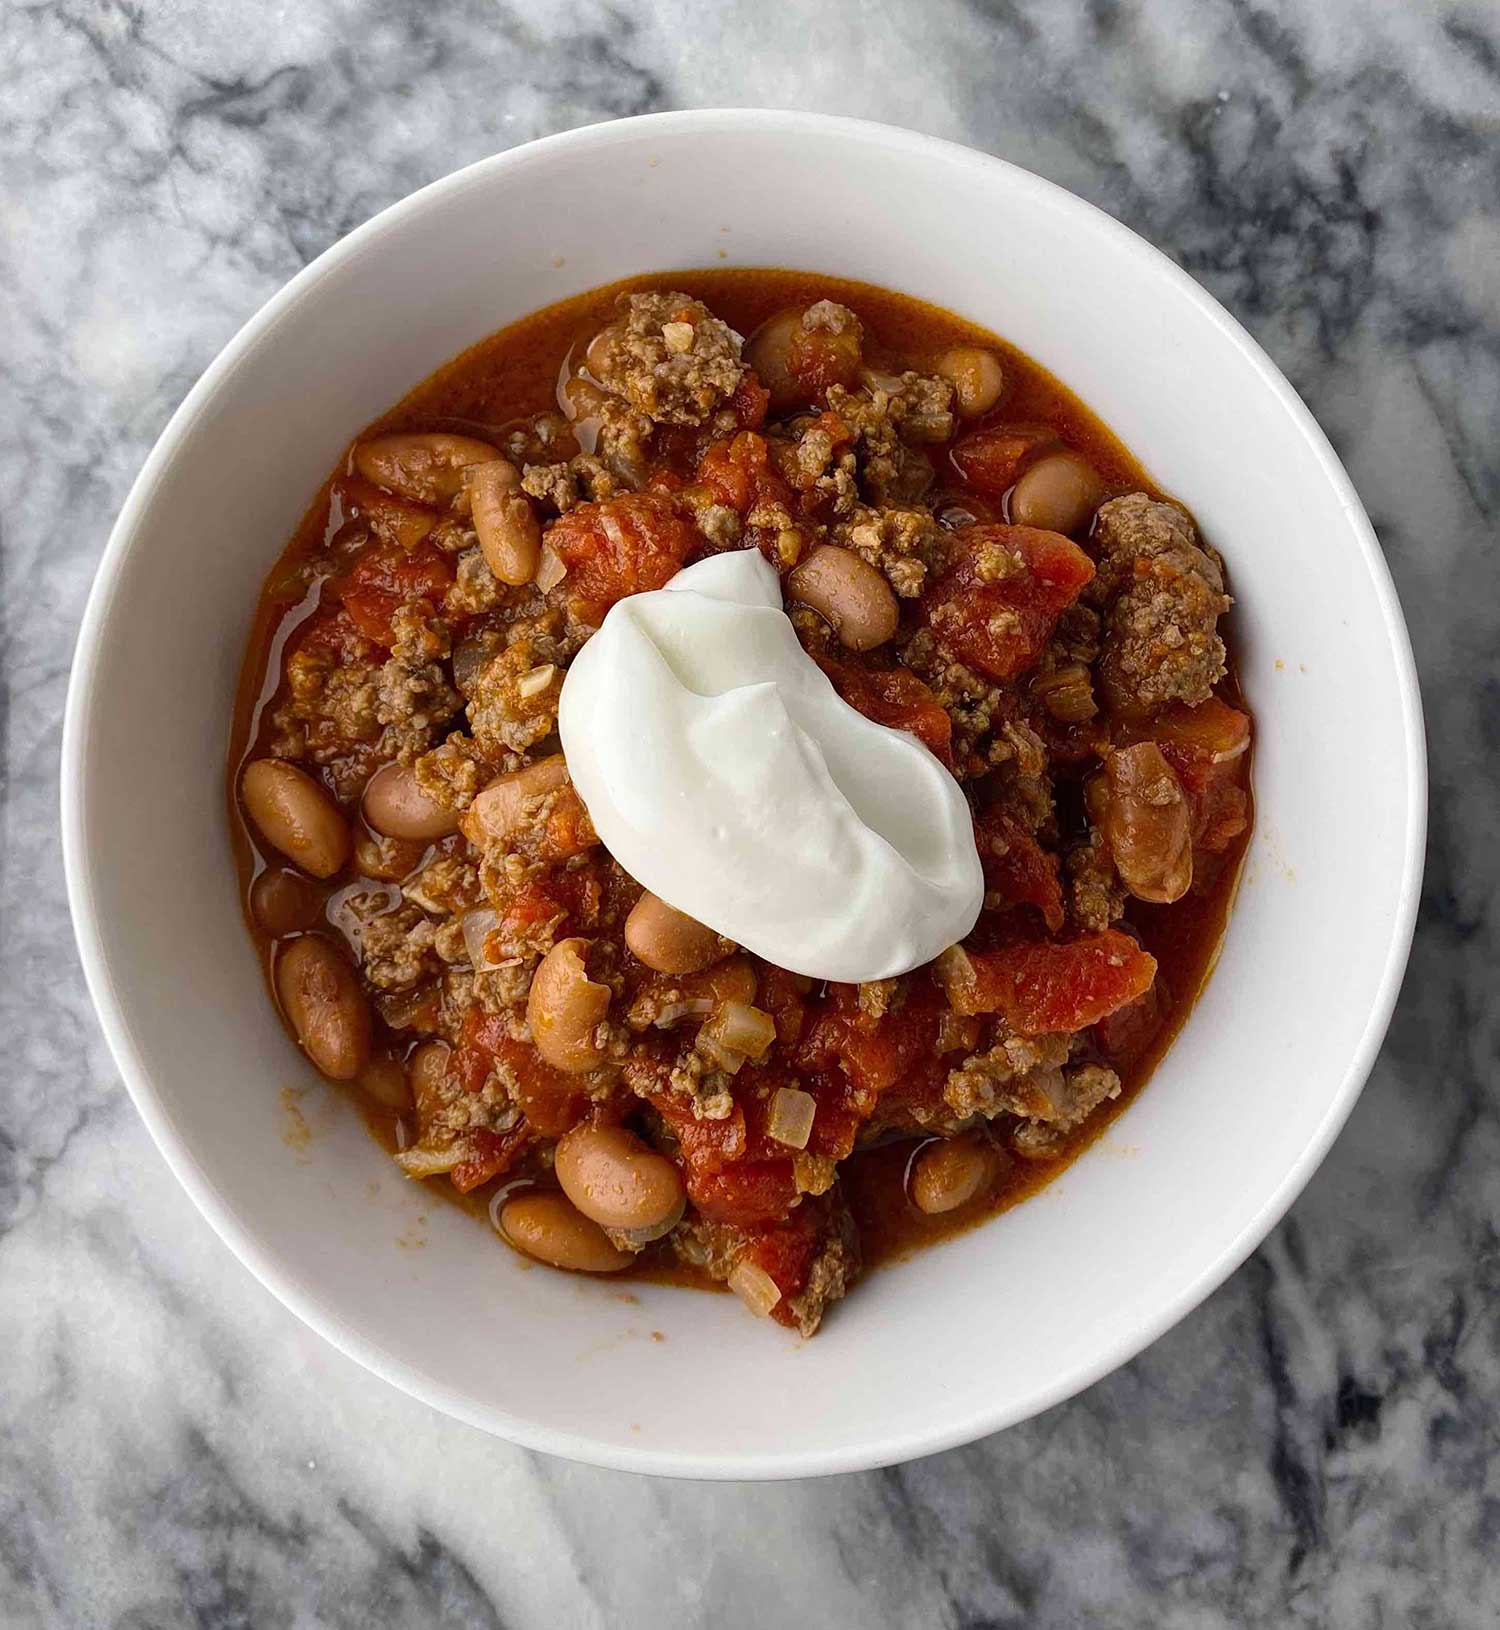 Bowl of chili topped with sour cream